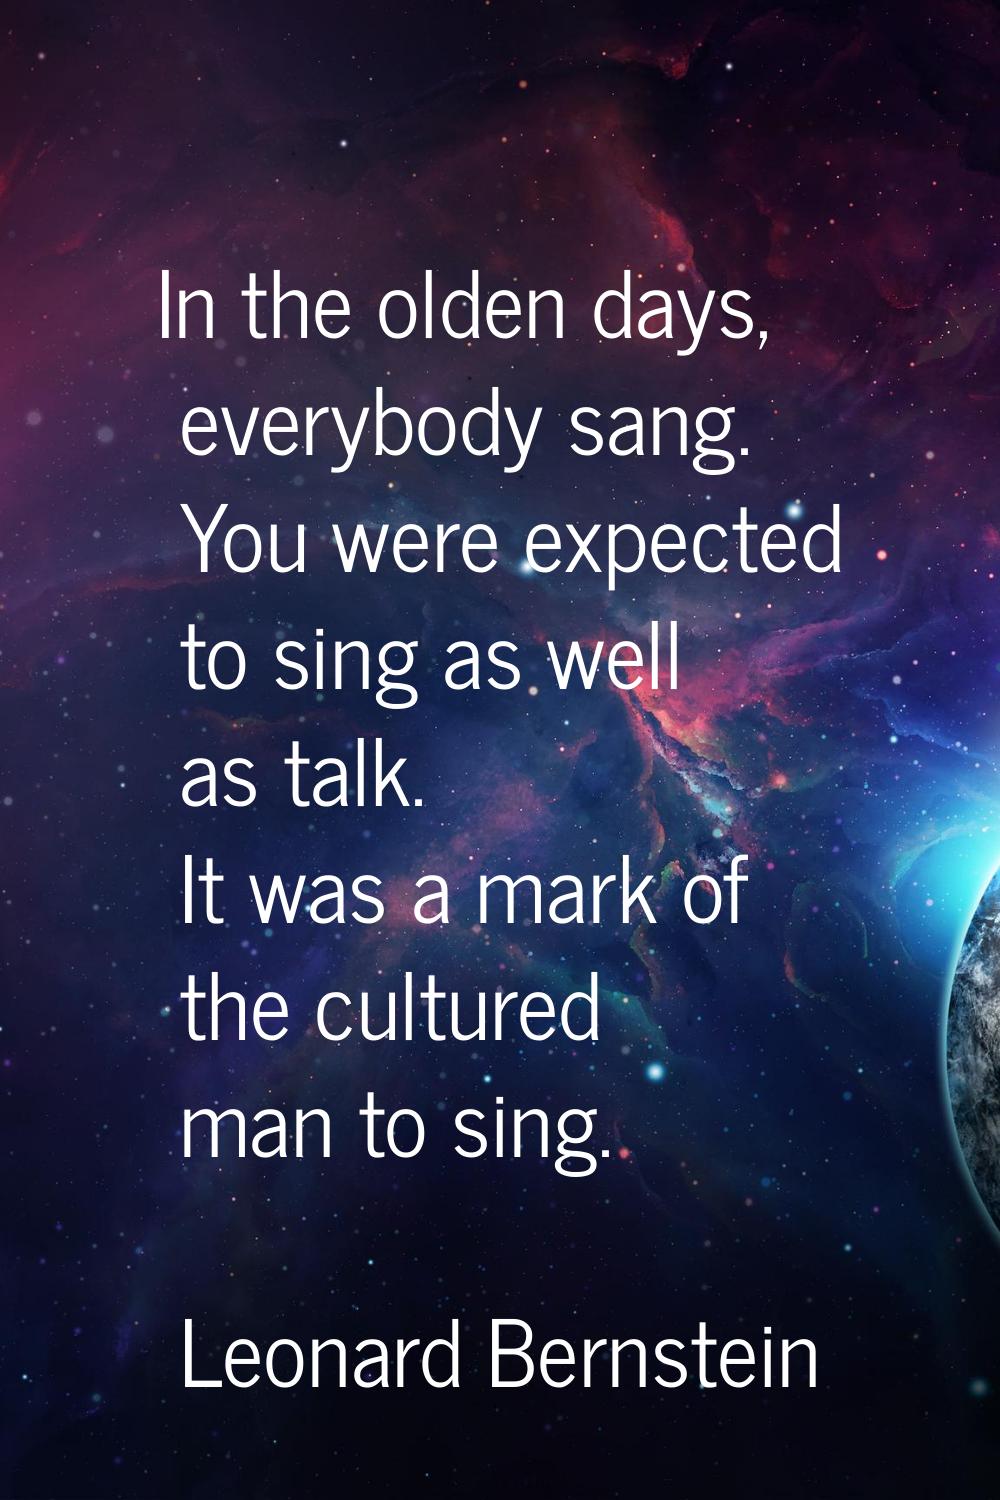 In the olden days, everybody sang. You were expected to sing as well as talk. It was a mark of the 